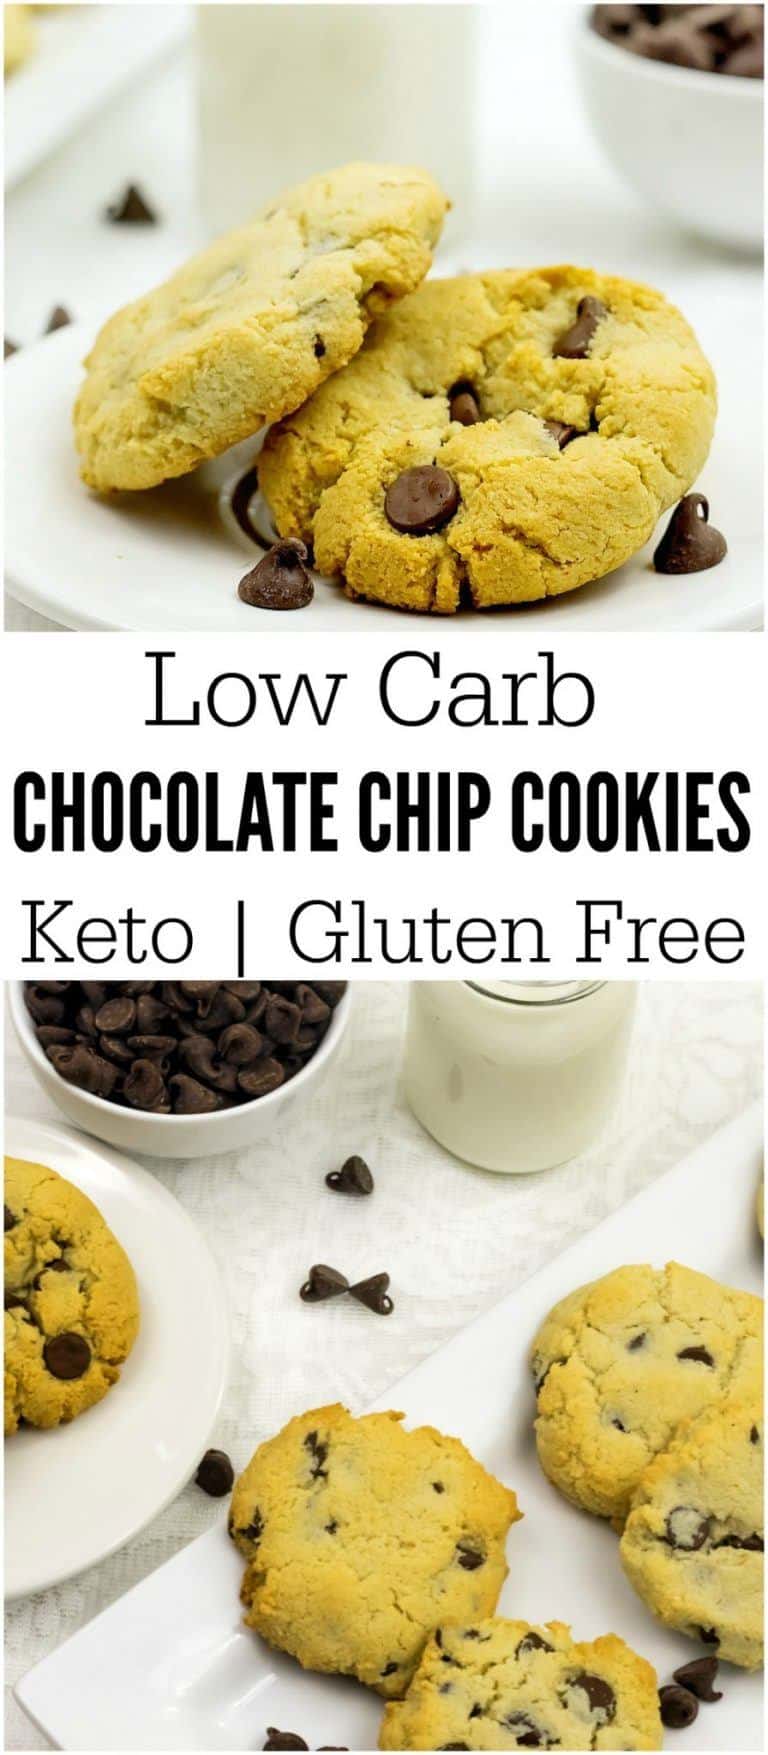 Crunchy Low Carb Chocolate Chip Cookies, Keto, GF, 1 CARB!